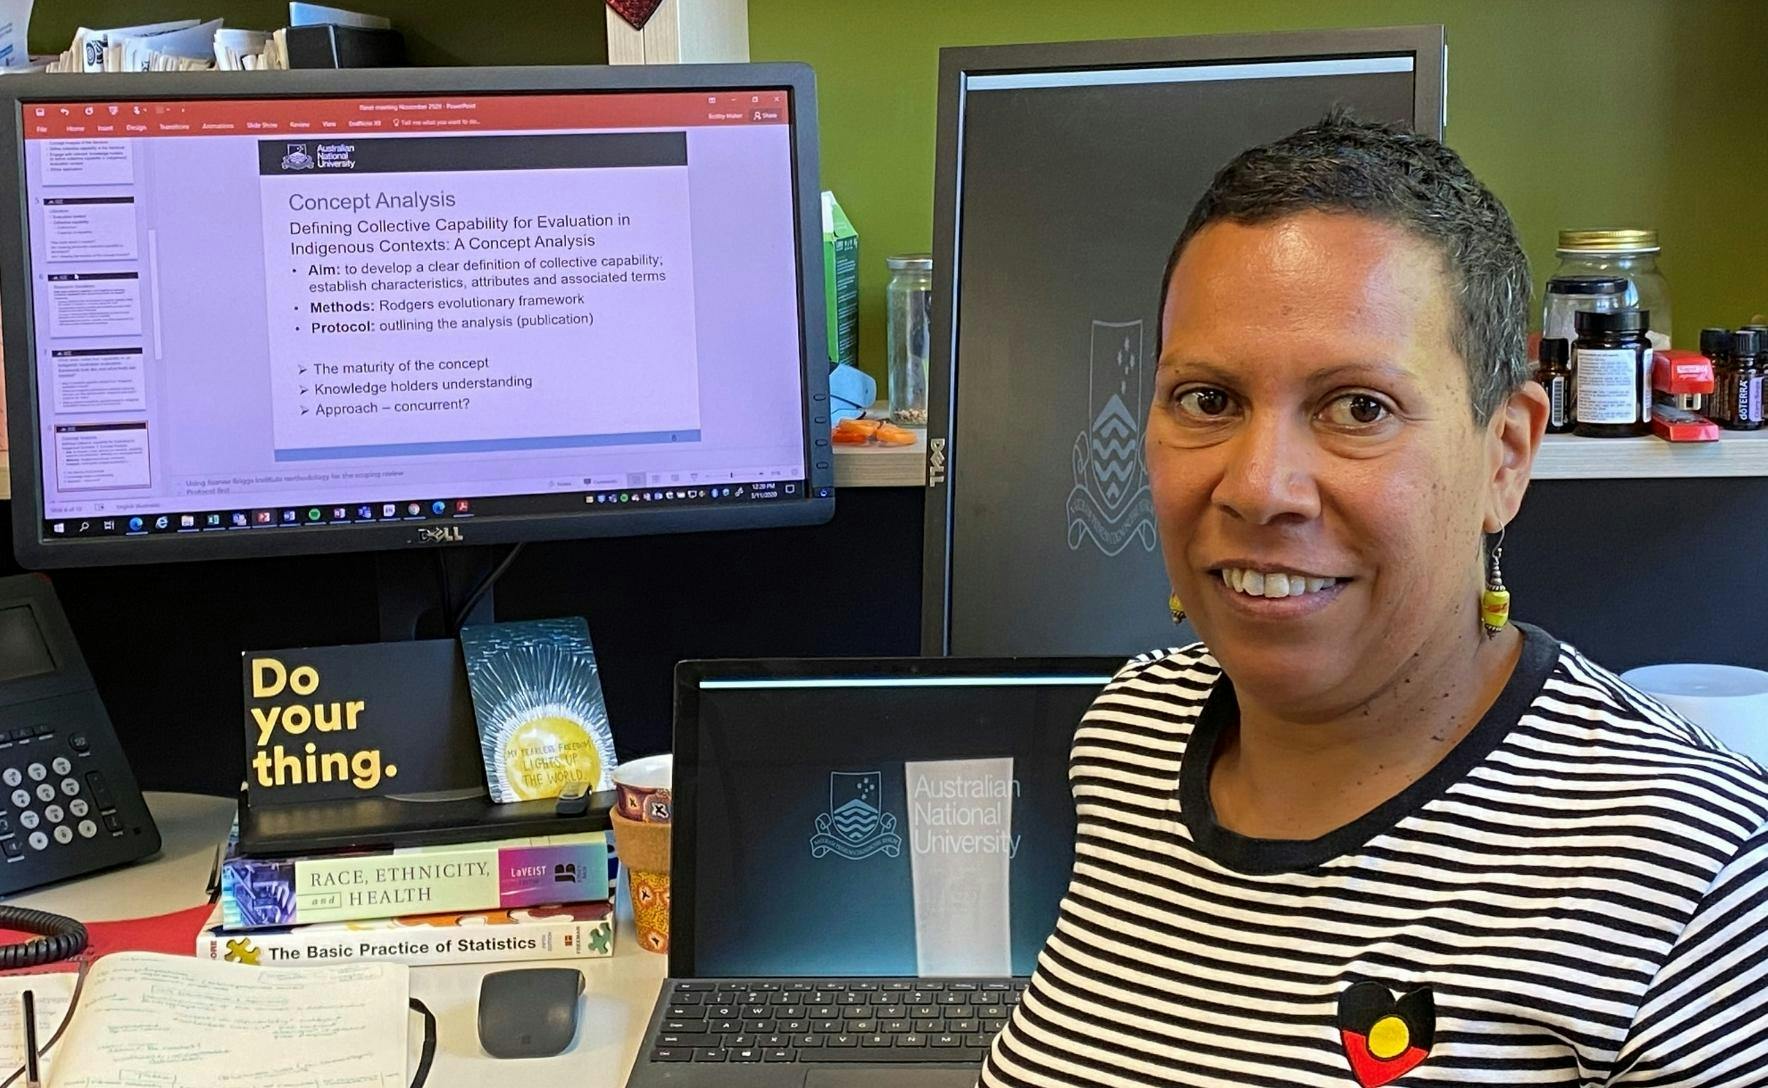 Bobby is wearing a black and white striped top with an aboriginal flag in a love heart shape on her left chest. She is sitting at a desk and smiling